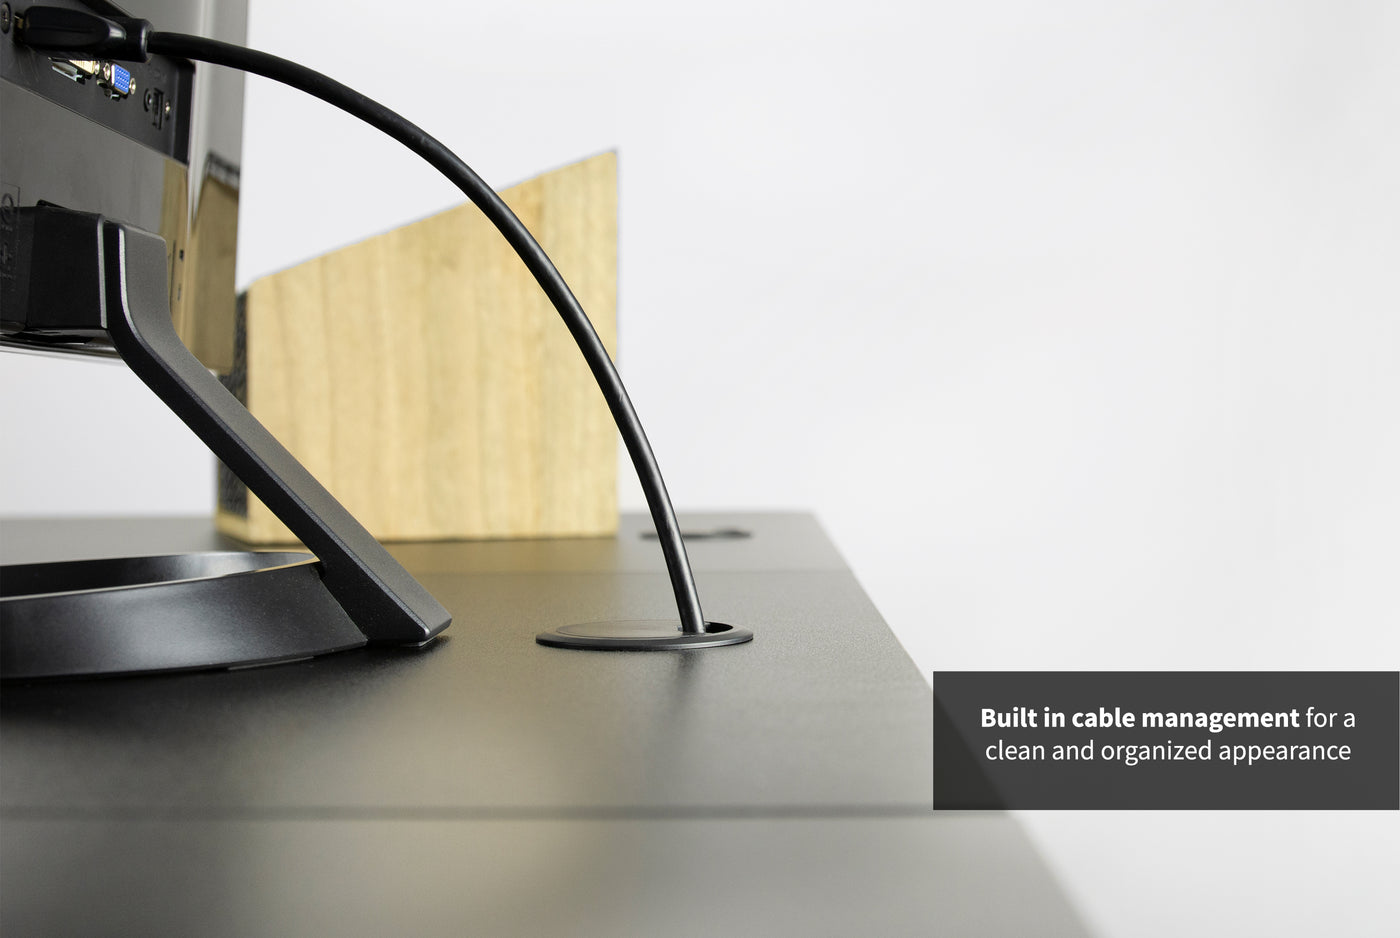 Ergonomic sit or stand active workstation with adjustable height and built-in cable management.